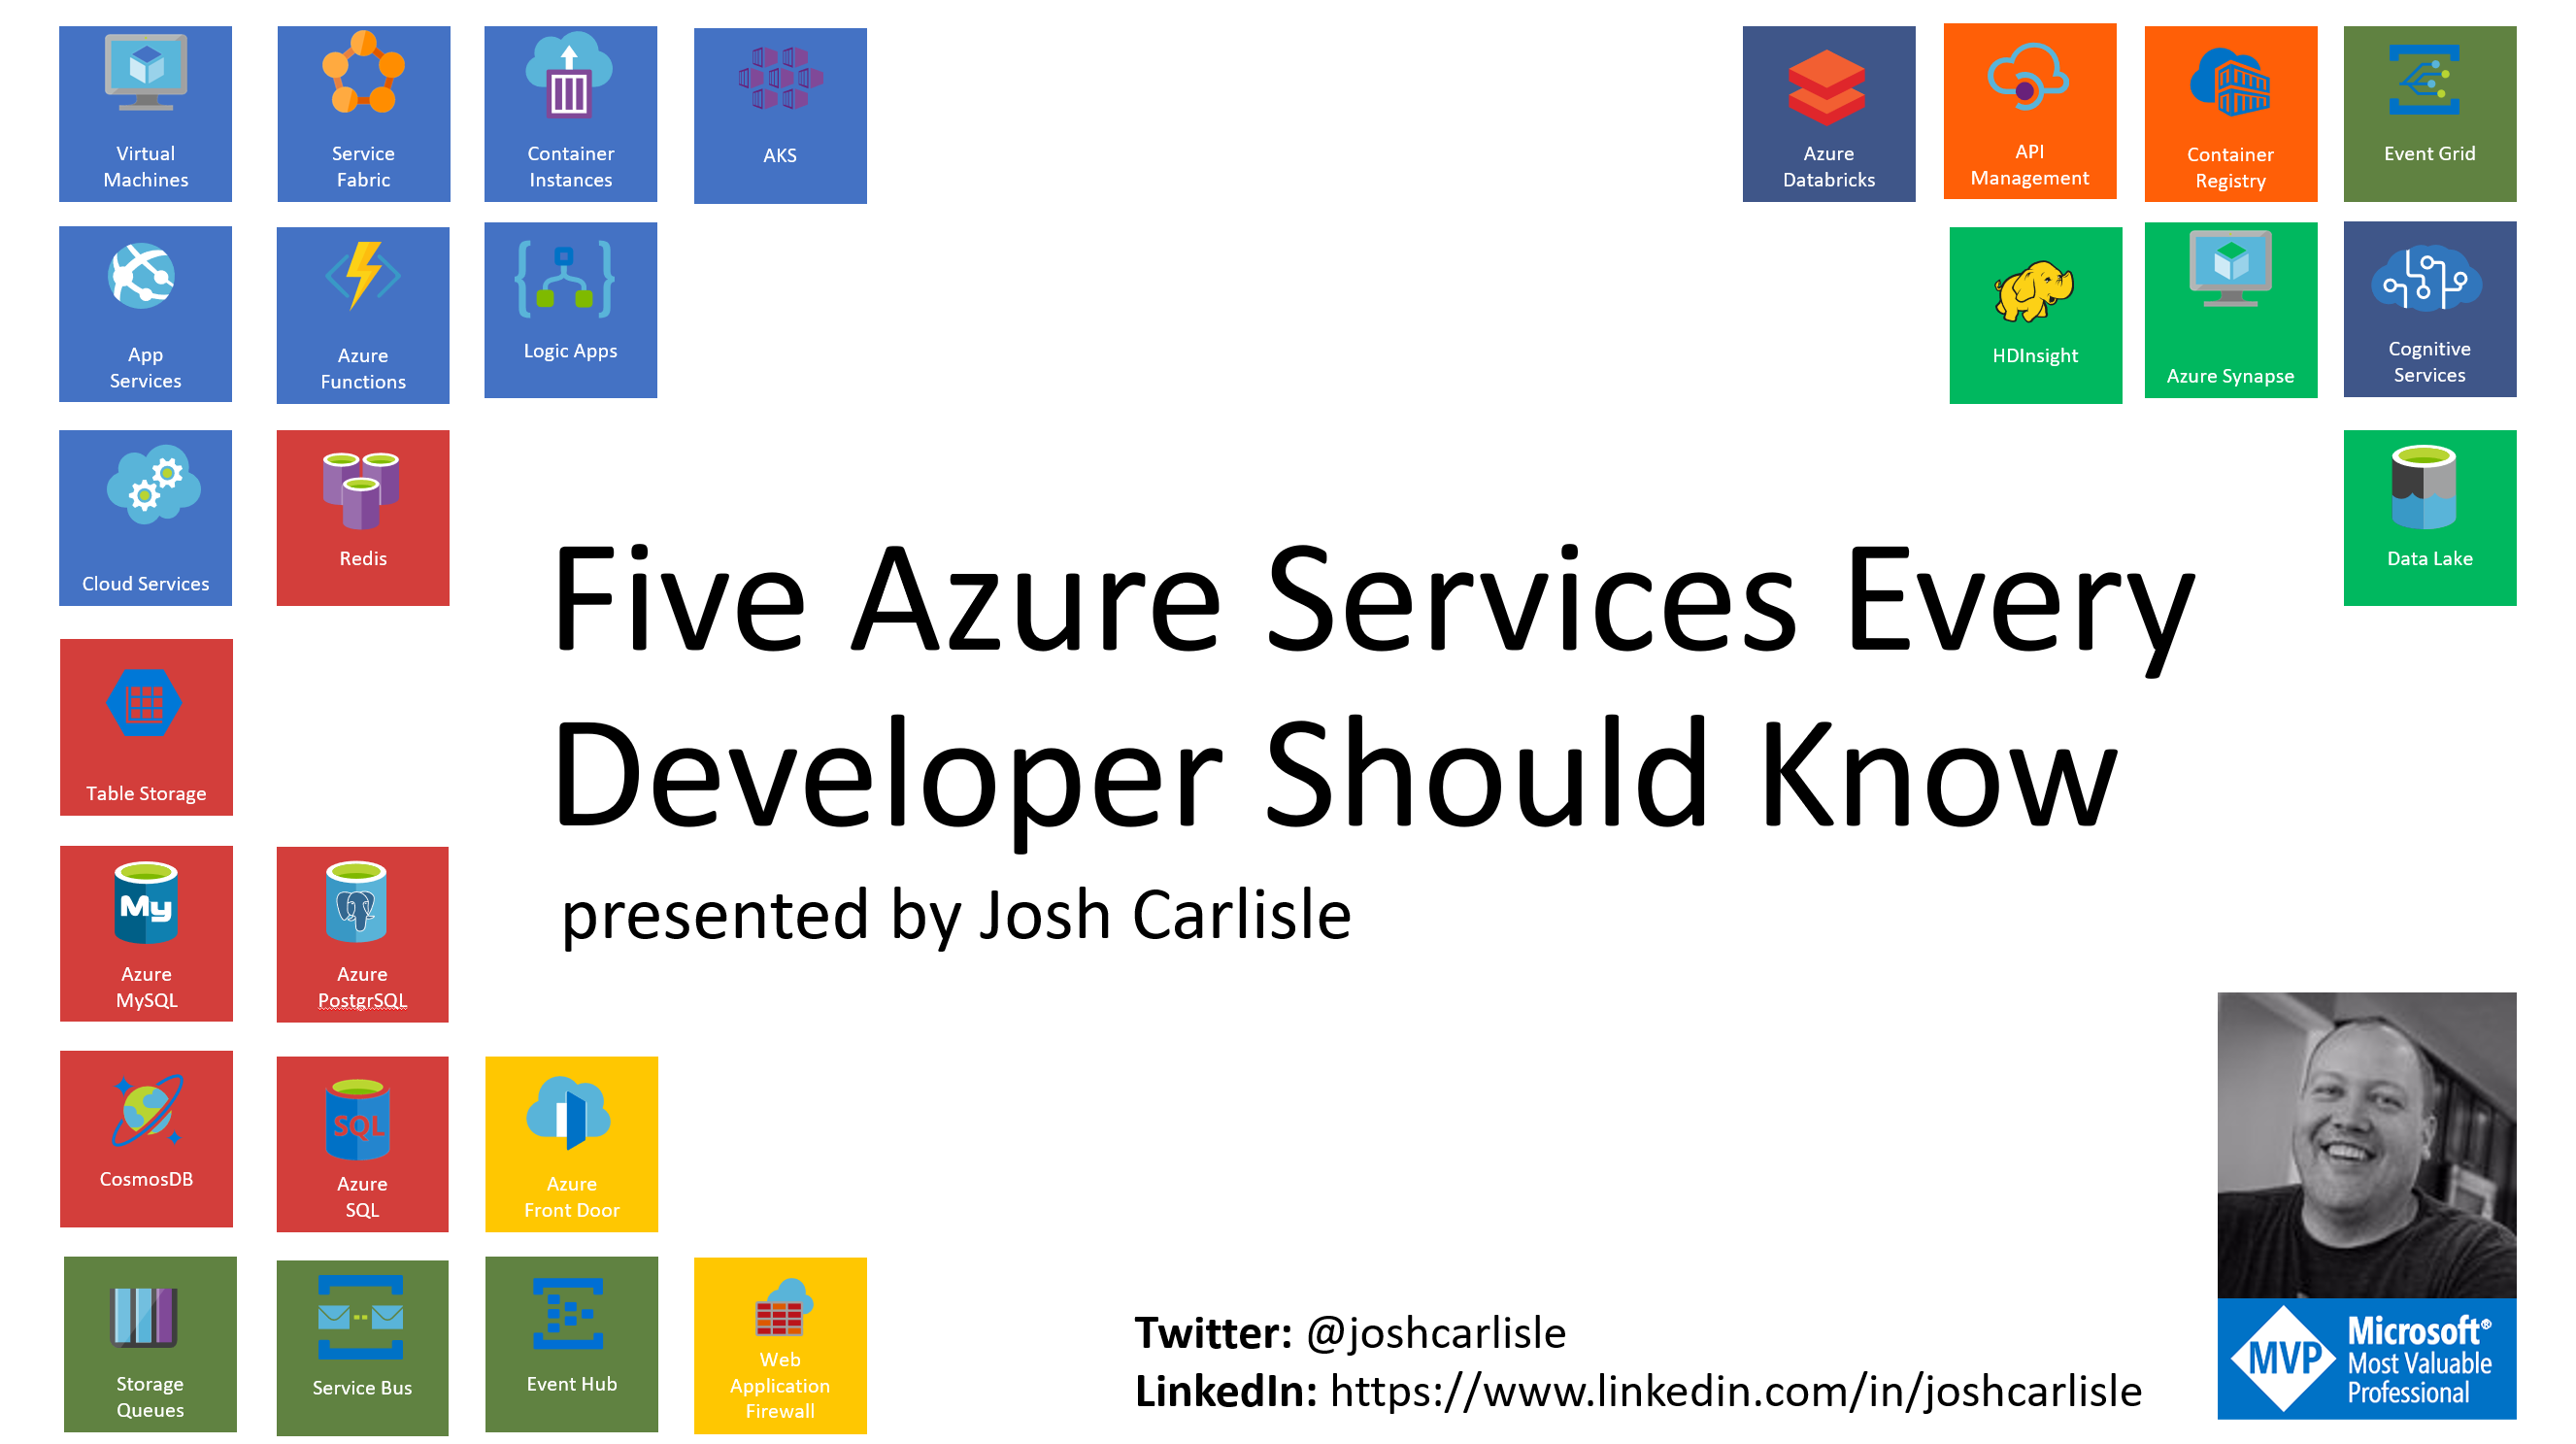 Azure In Atlanta - 5 Azure Services Every Developer Should Know